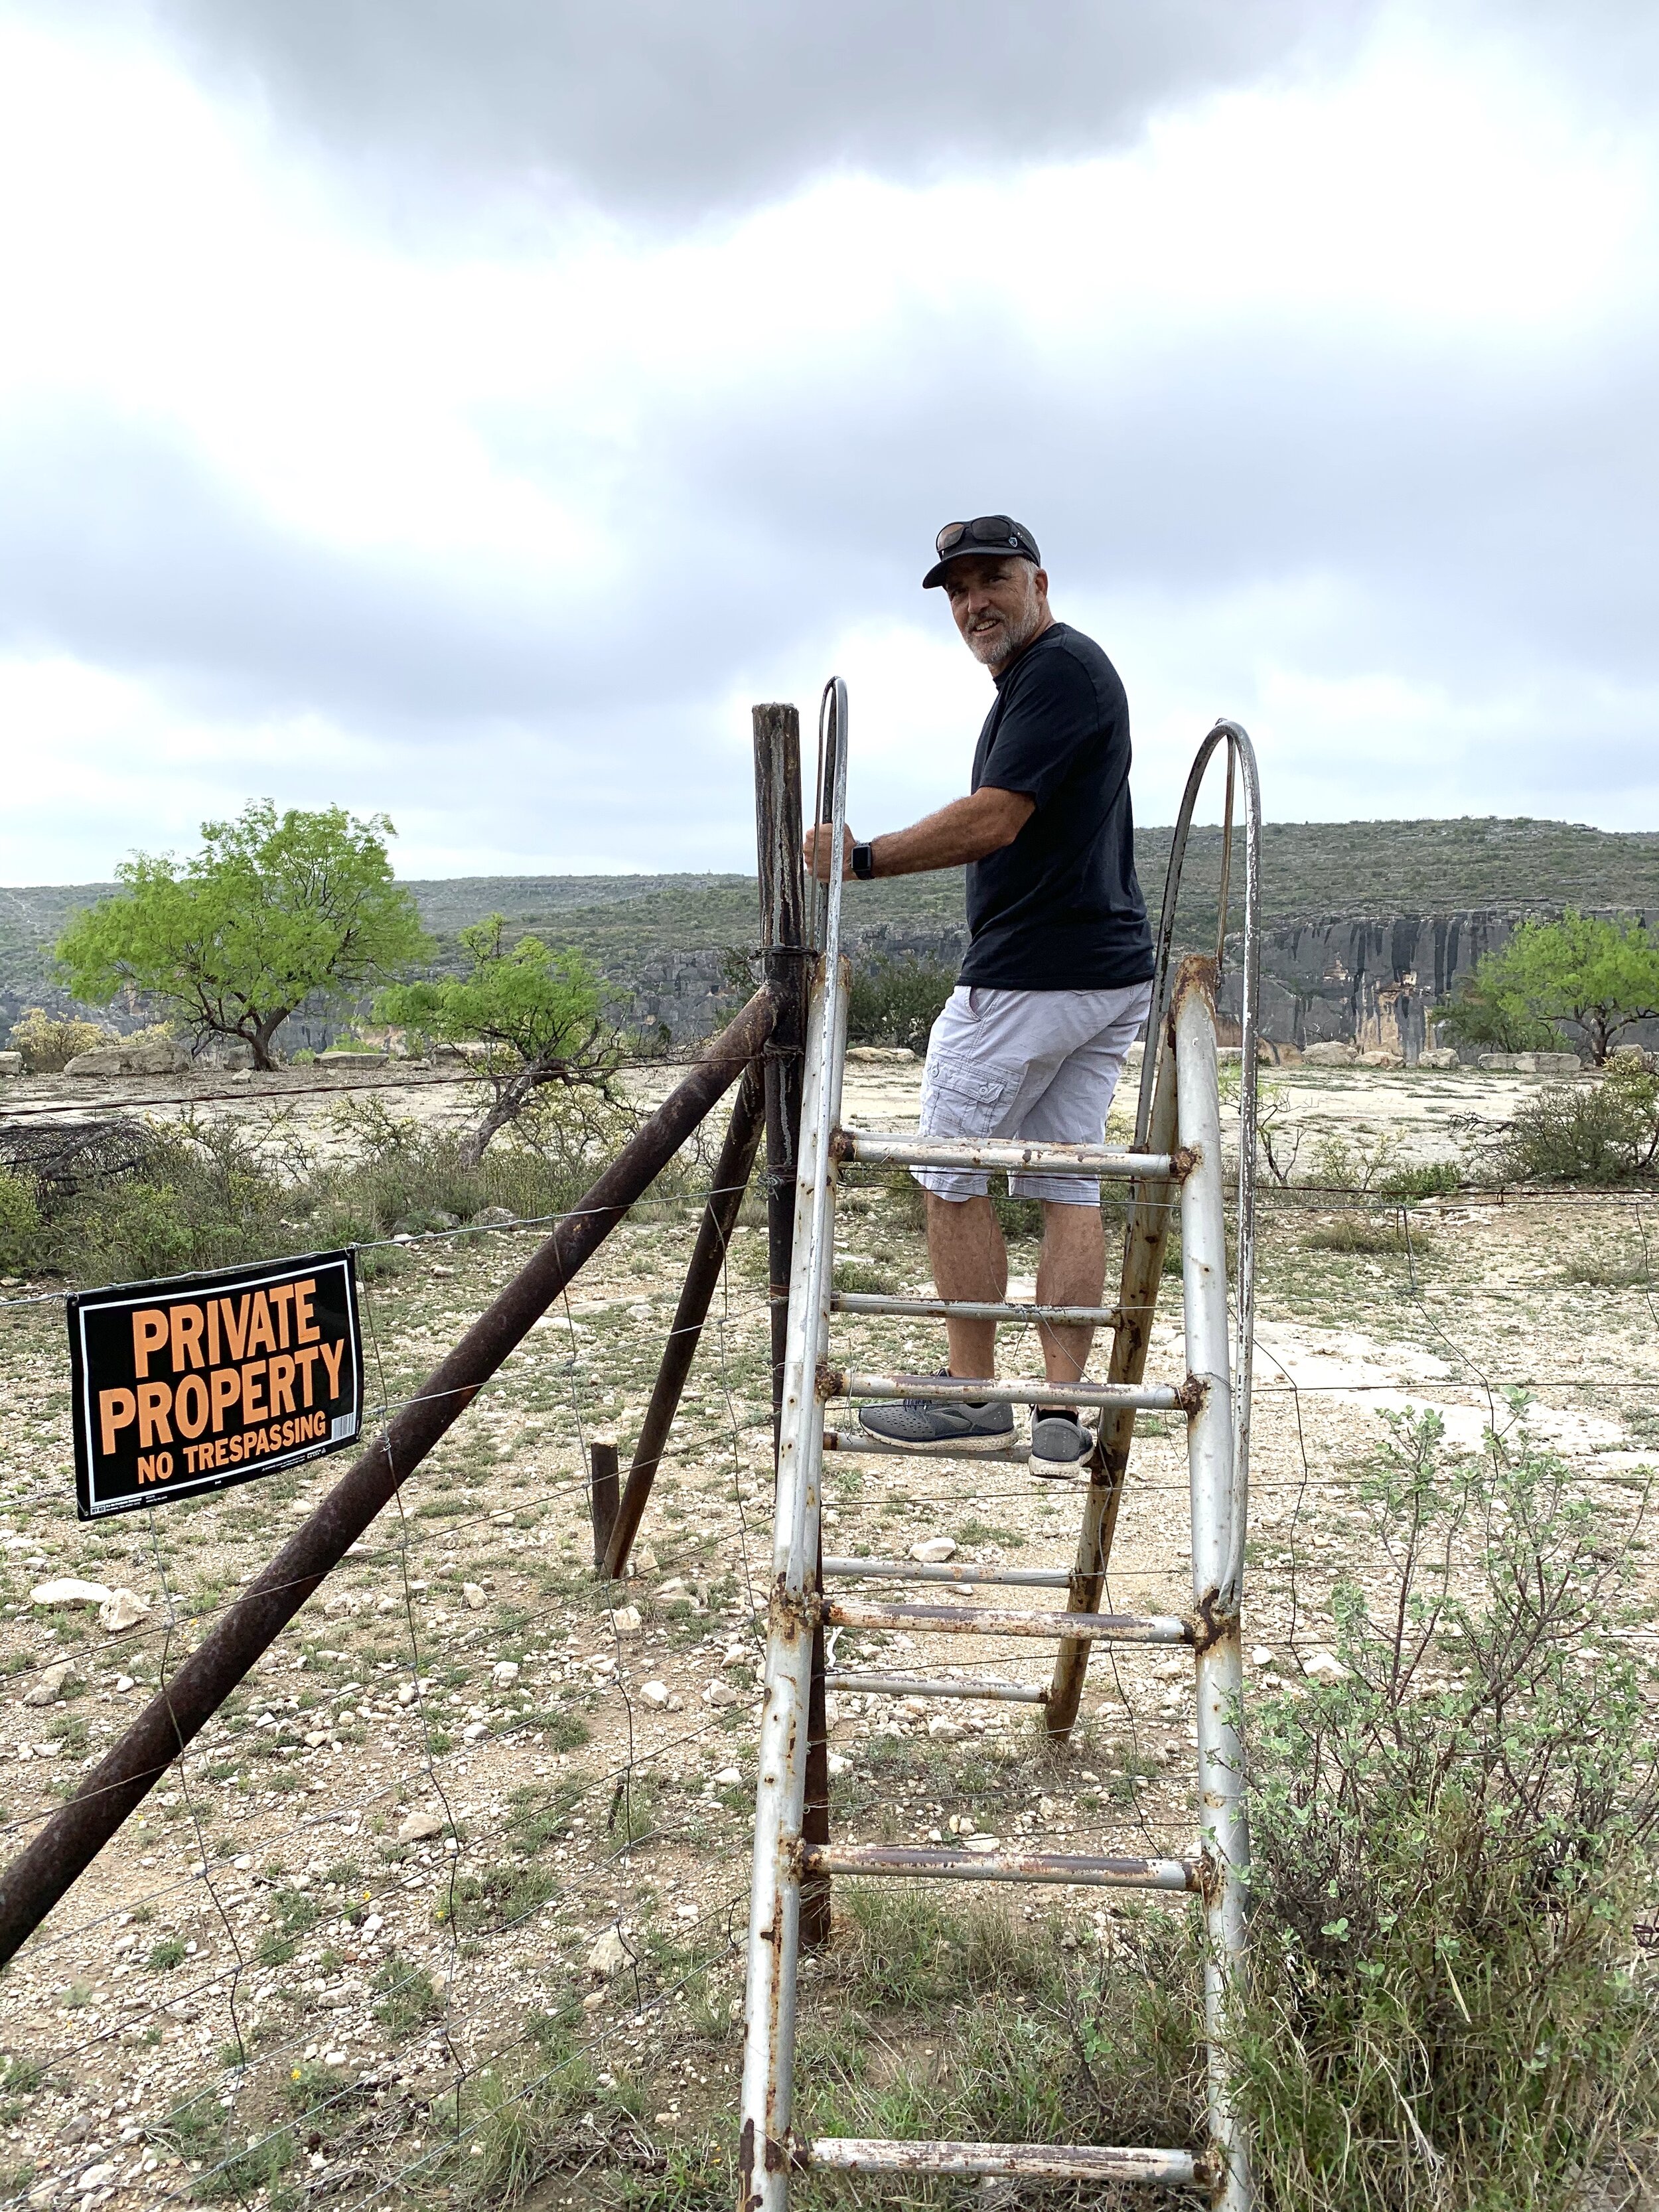  They would not have provided this nifty ladder over the fence if they really meant it. We were on our way to see the Pecos River High Bridge and the water below! 